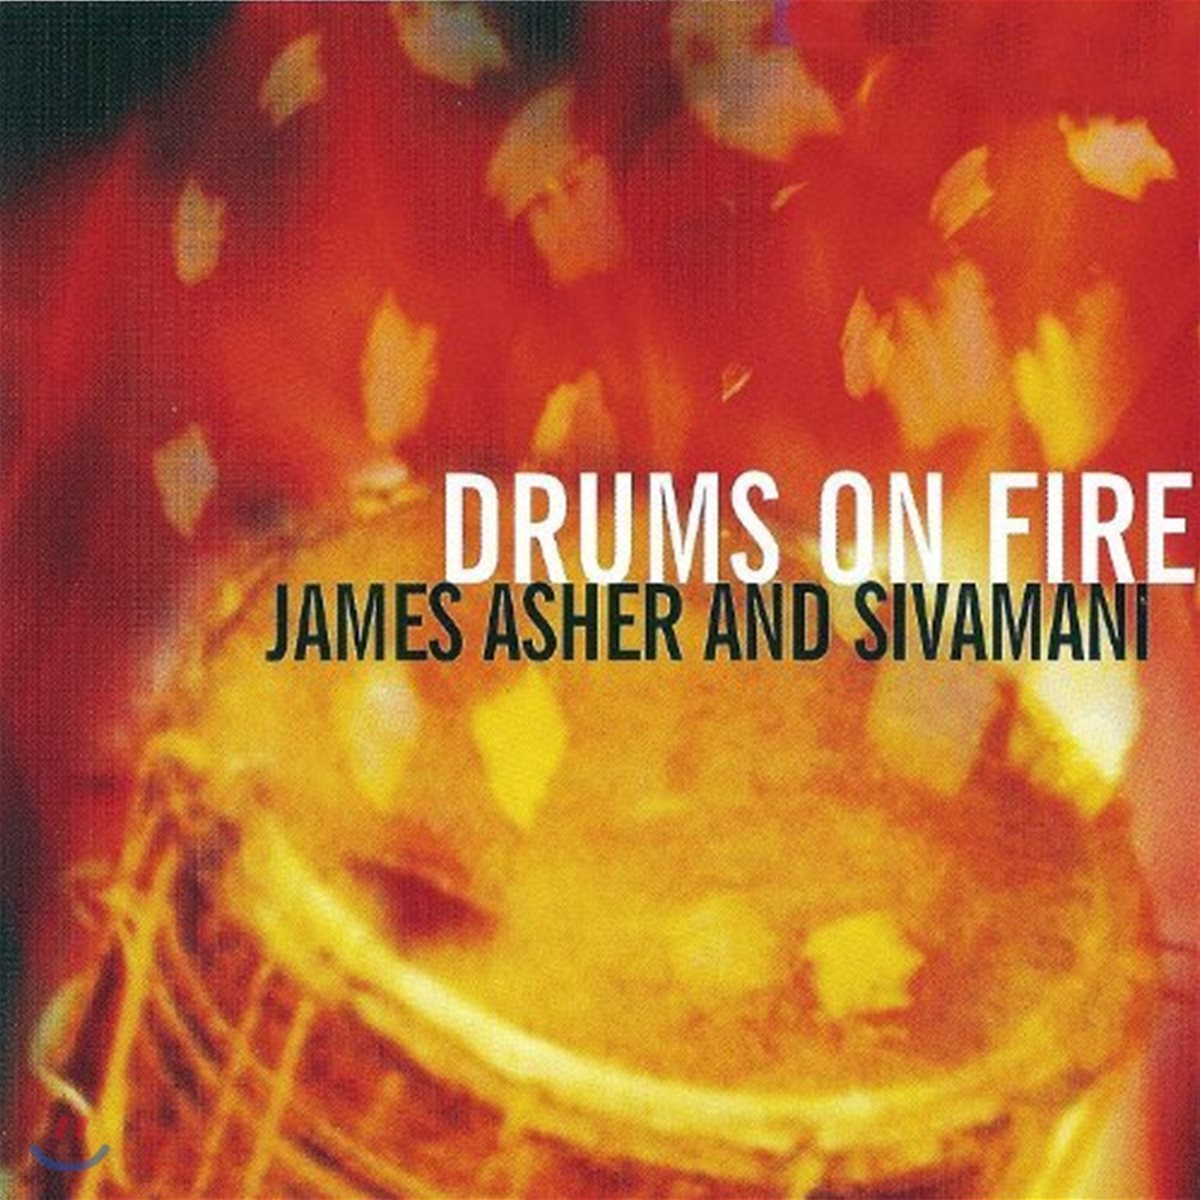 James Asher and Sivamani - Drums on Fire